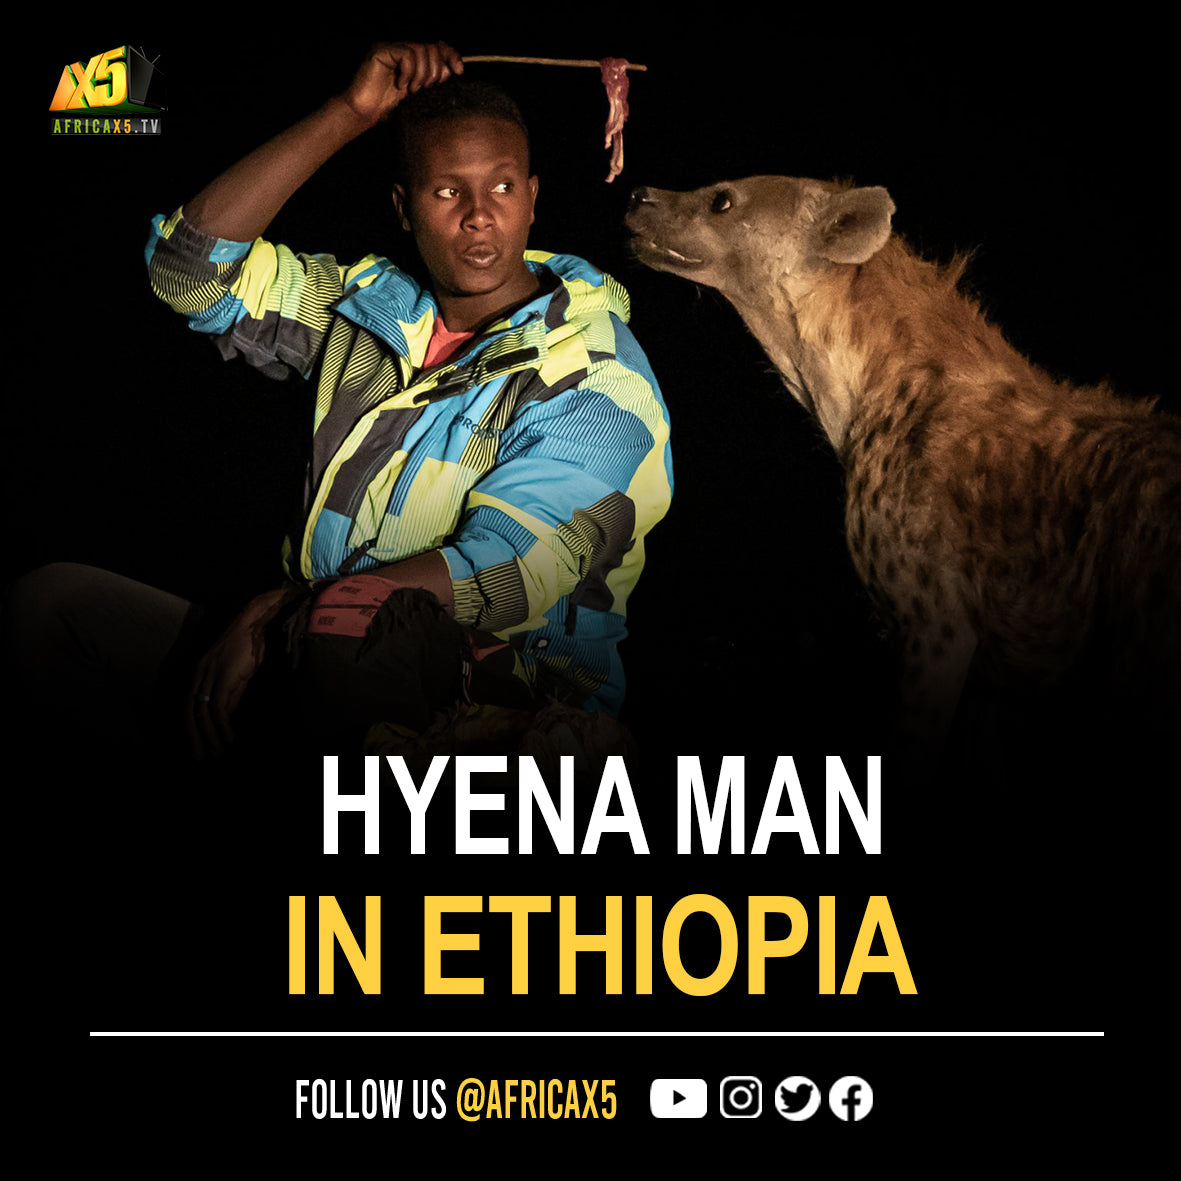 There is a man in Ethiopia known as Abbas “The Hyena Man”. He started feeding hyenas to keep them away from livestock, but he eventually gained their trust and has even been led back to their den to meet some of their cubs.